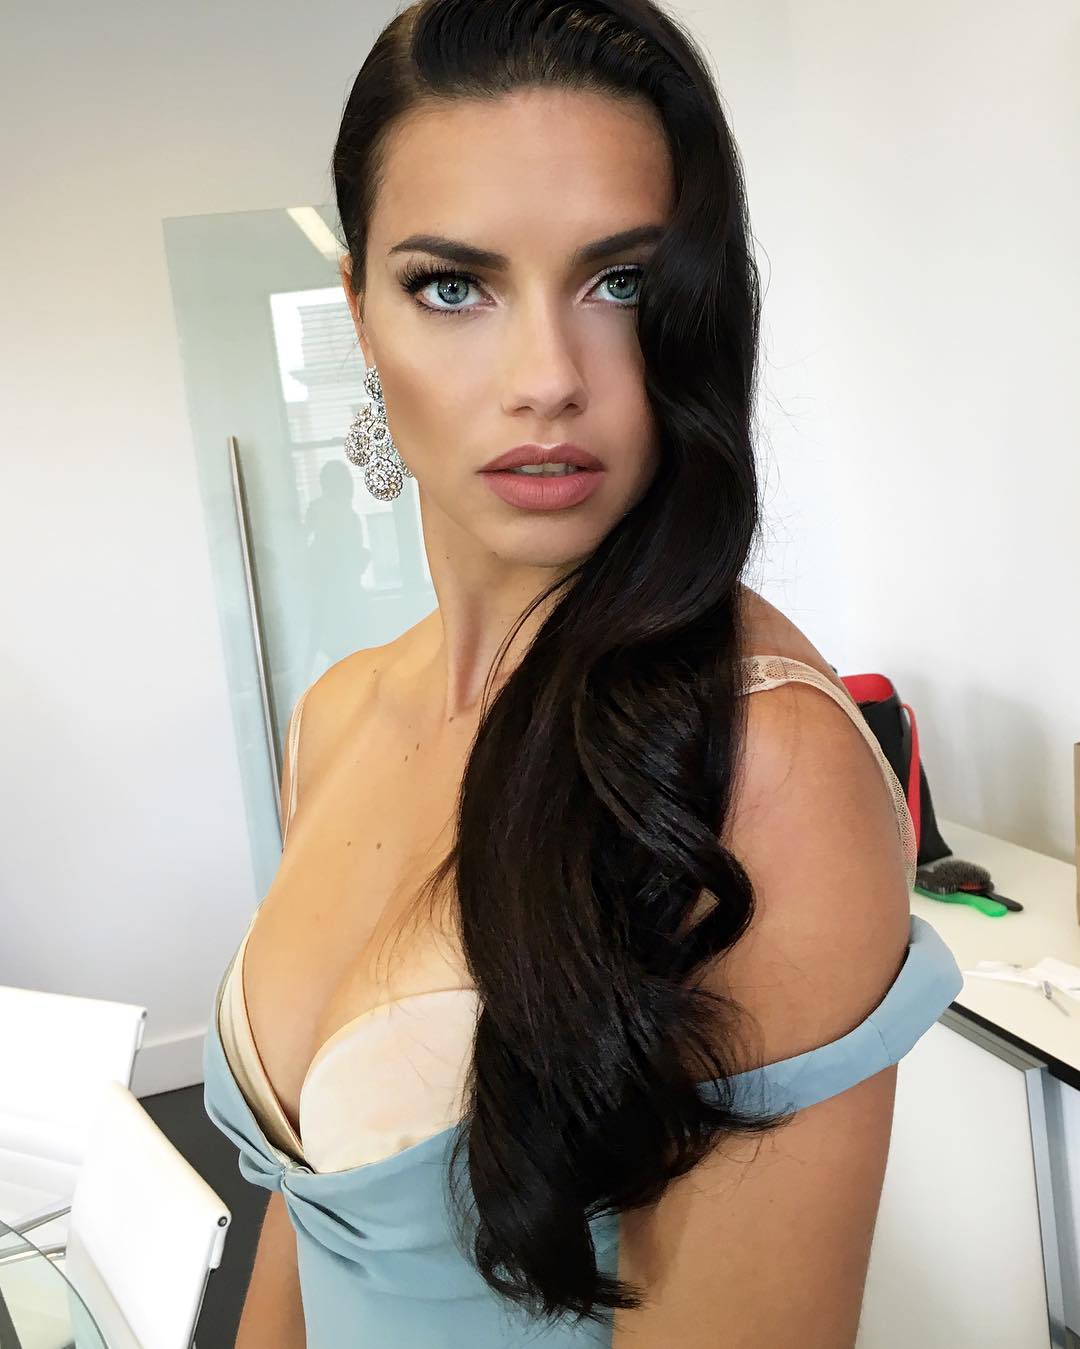 61 Sexy Adriana Lima Boobs Pictures Are Really Mesmerising And Beautiful | Best Of Comic Books